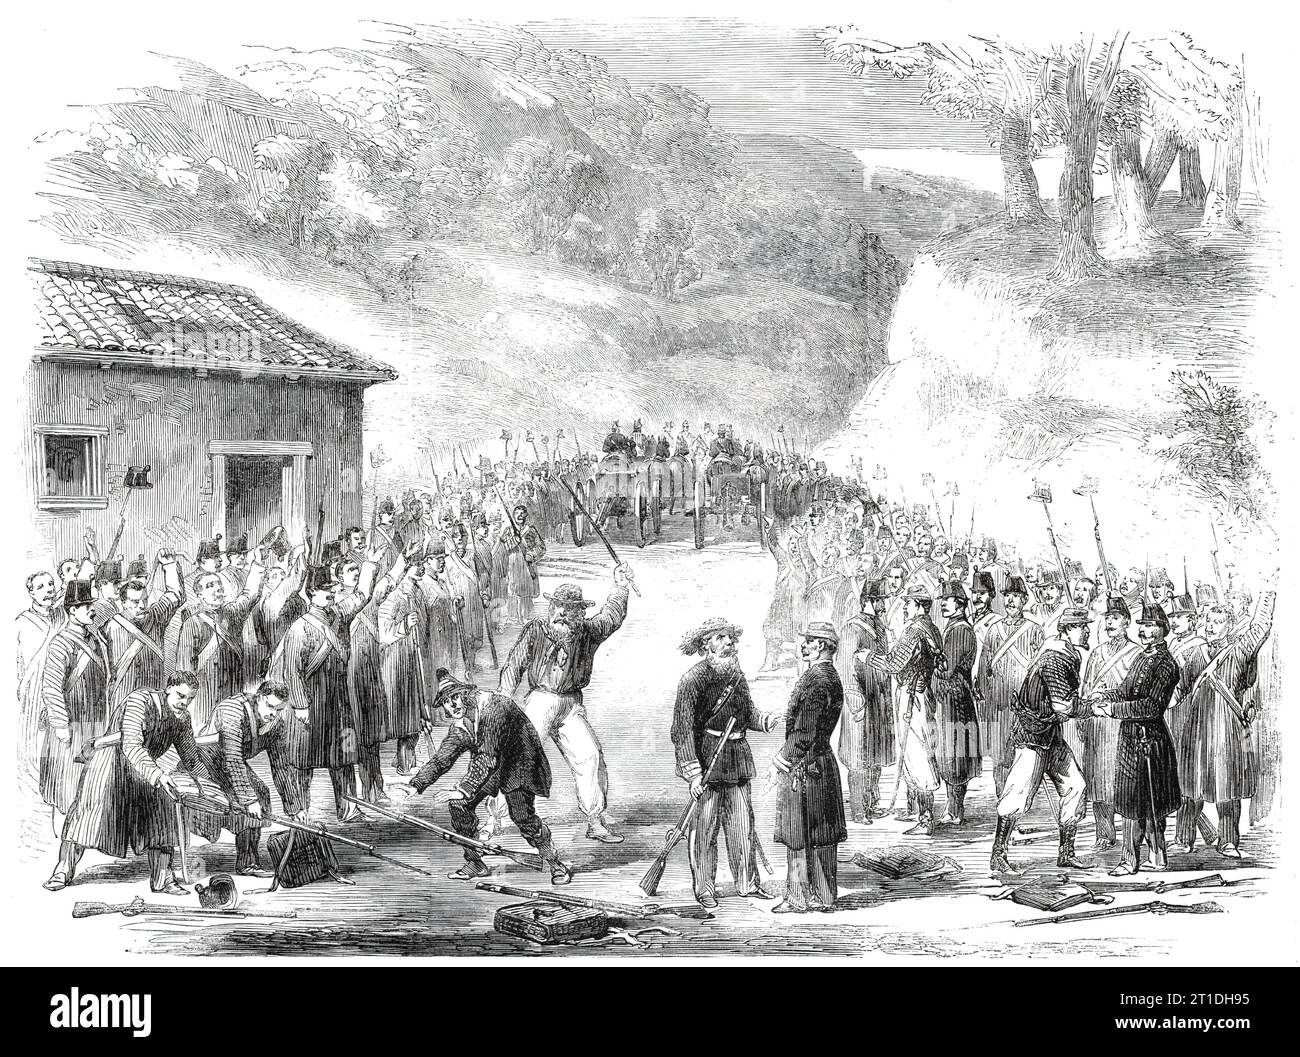 Surrender of the Neapolitan troops at Soveria, Calabria - from a sketch by our special artist in Italy, Frank Vizetelly, 1860. 'Soveria was one of those mountain fastnesses which yielded to [Garibaldi] at once without a struggle. The correspondent of the Daily News...writes: &quot;...I never witnessed more distressing scenes; peasants and soldiers getting hold of the arms given up by the Neapolitans...a terrific noise prevailing in that pandemonium of human beings...all the Neapolitan officers with whom I spoke told me they were glad that the capitulation, though hard and humiliating, had been Stock Photo